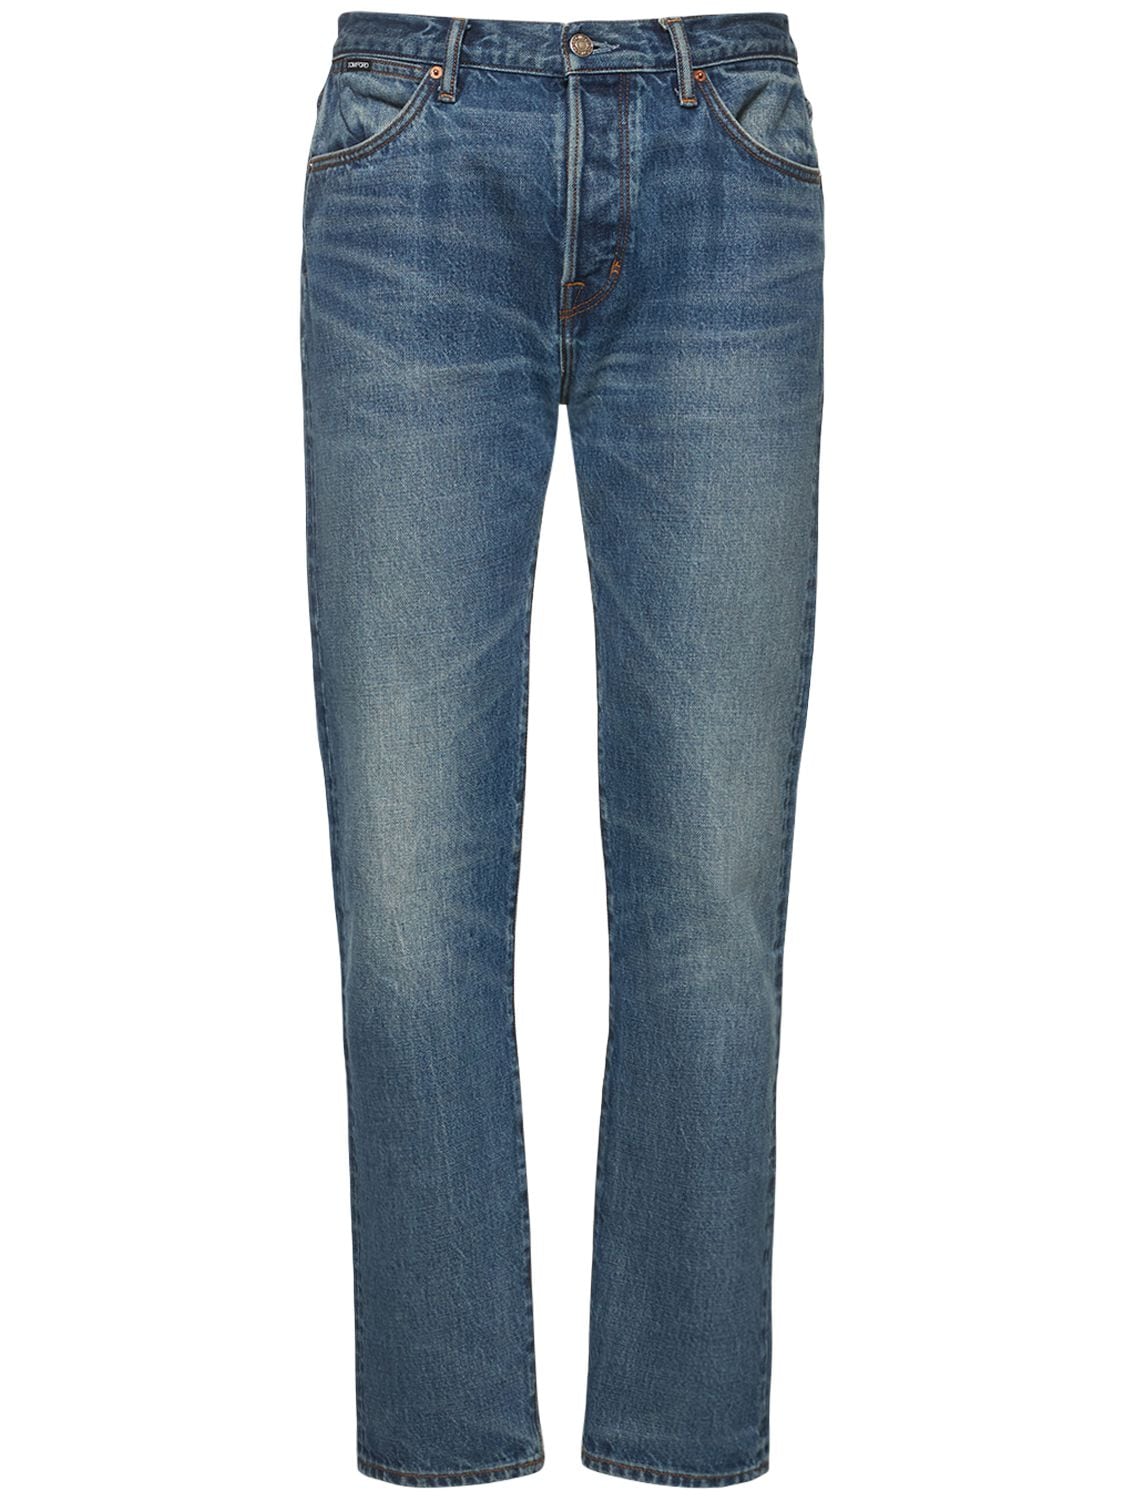 Tom Ford Authentic Slevedge Standard Fit Jeans In Medium Blue